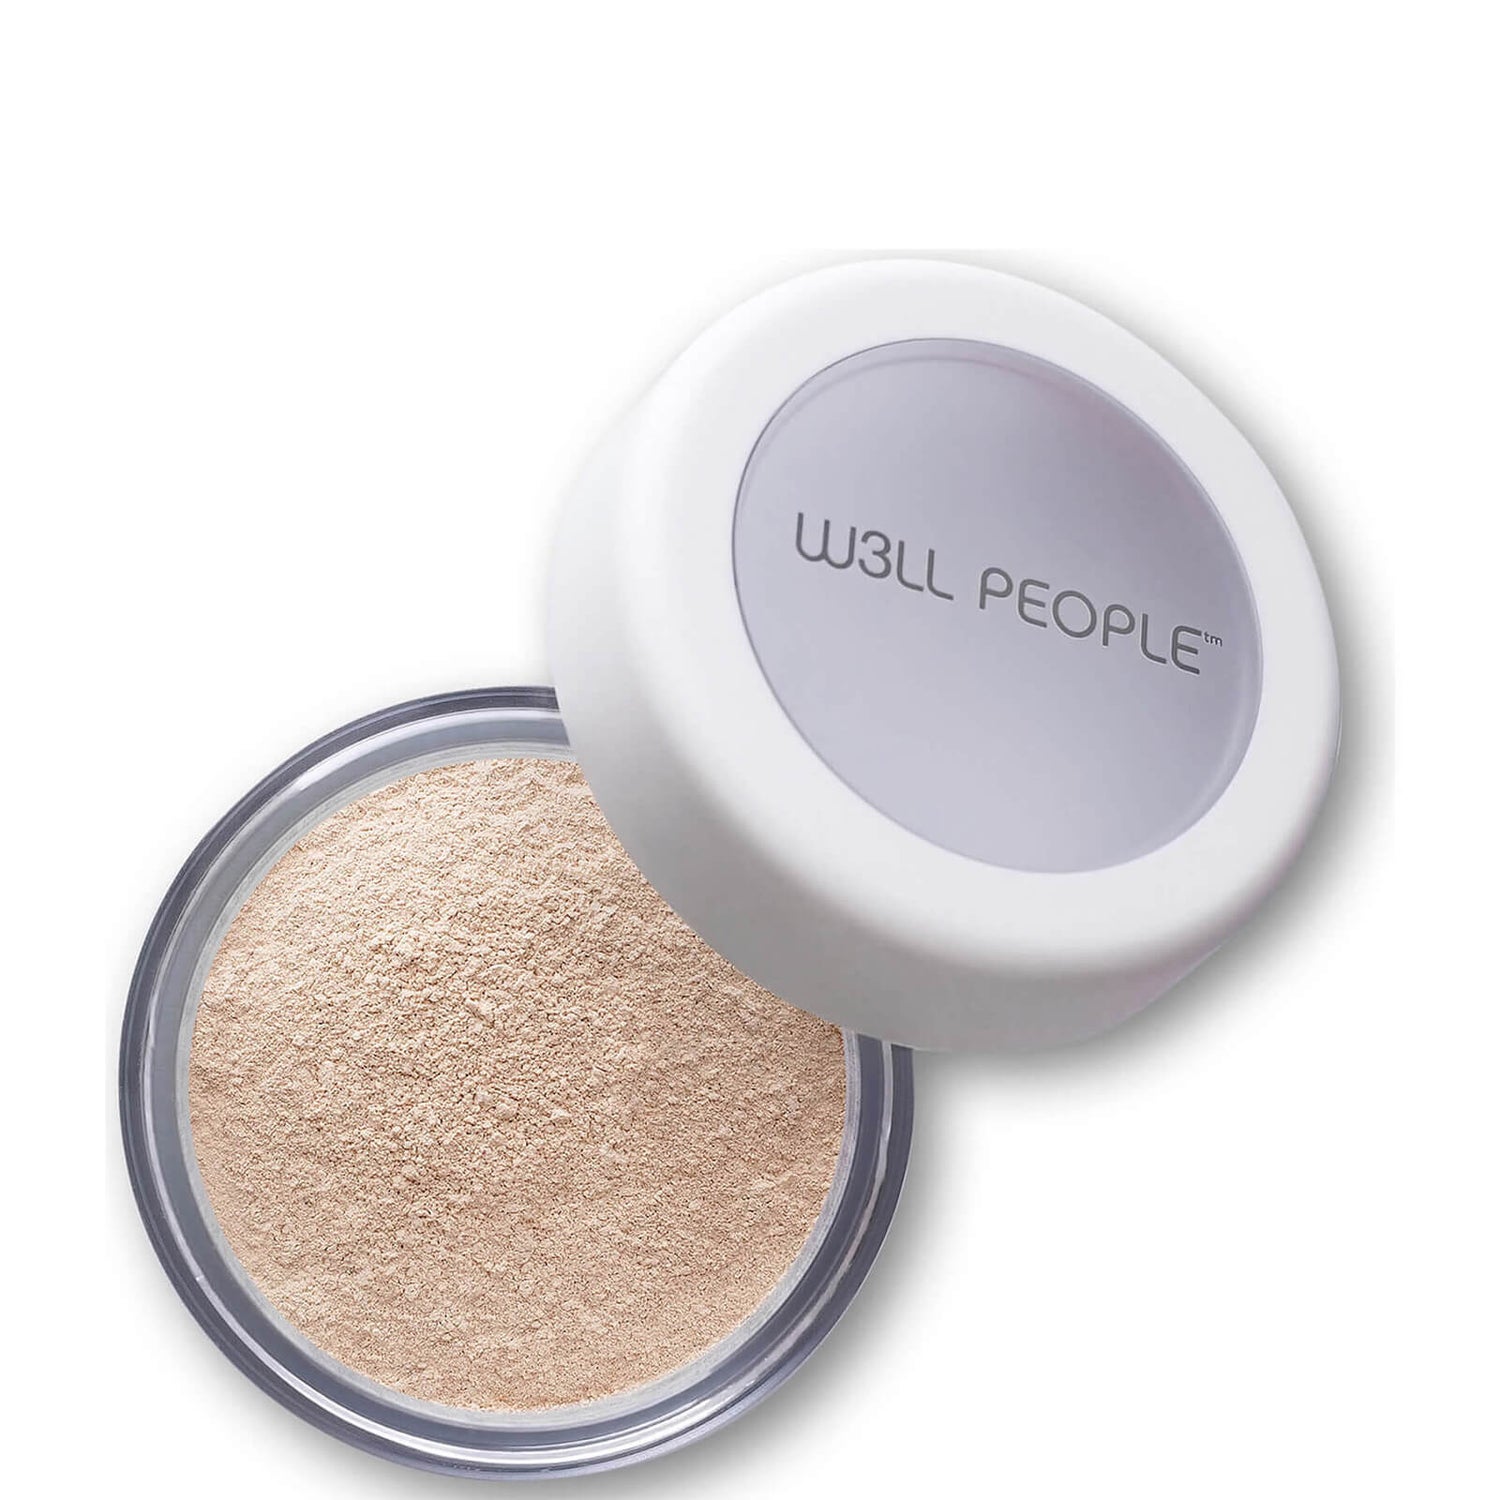 W3ll People Altruist Satin Mineral Foundation (Various Shades)